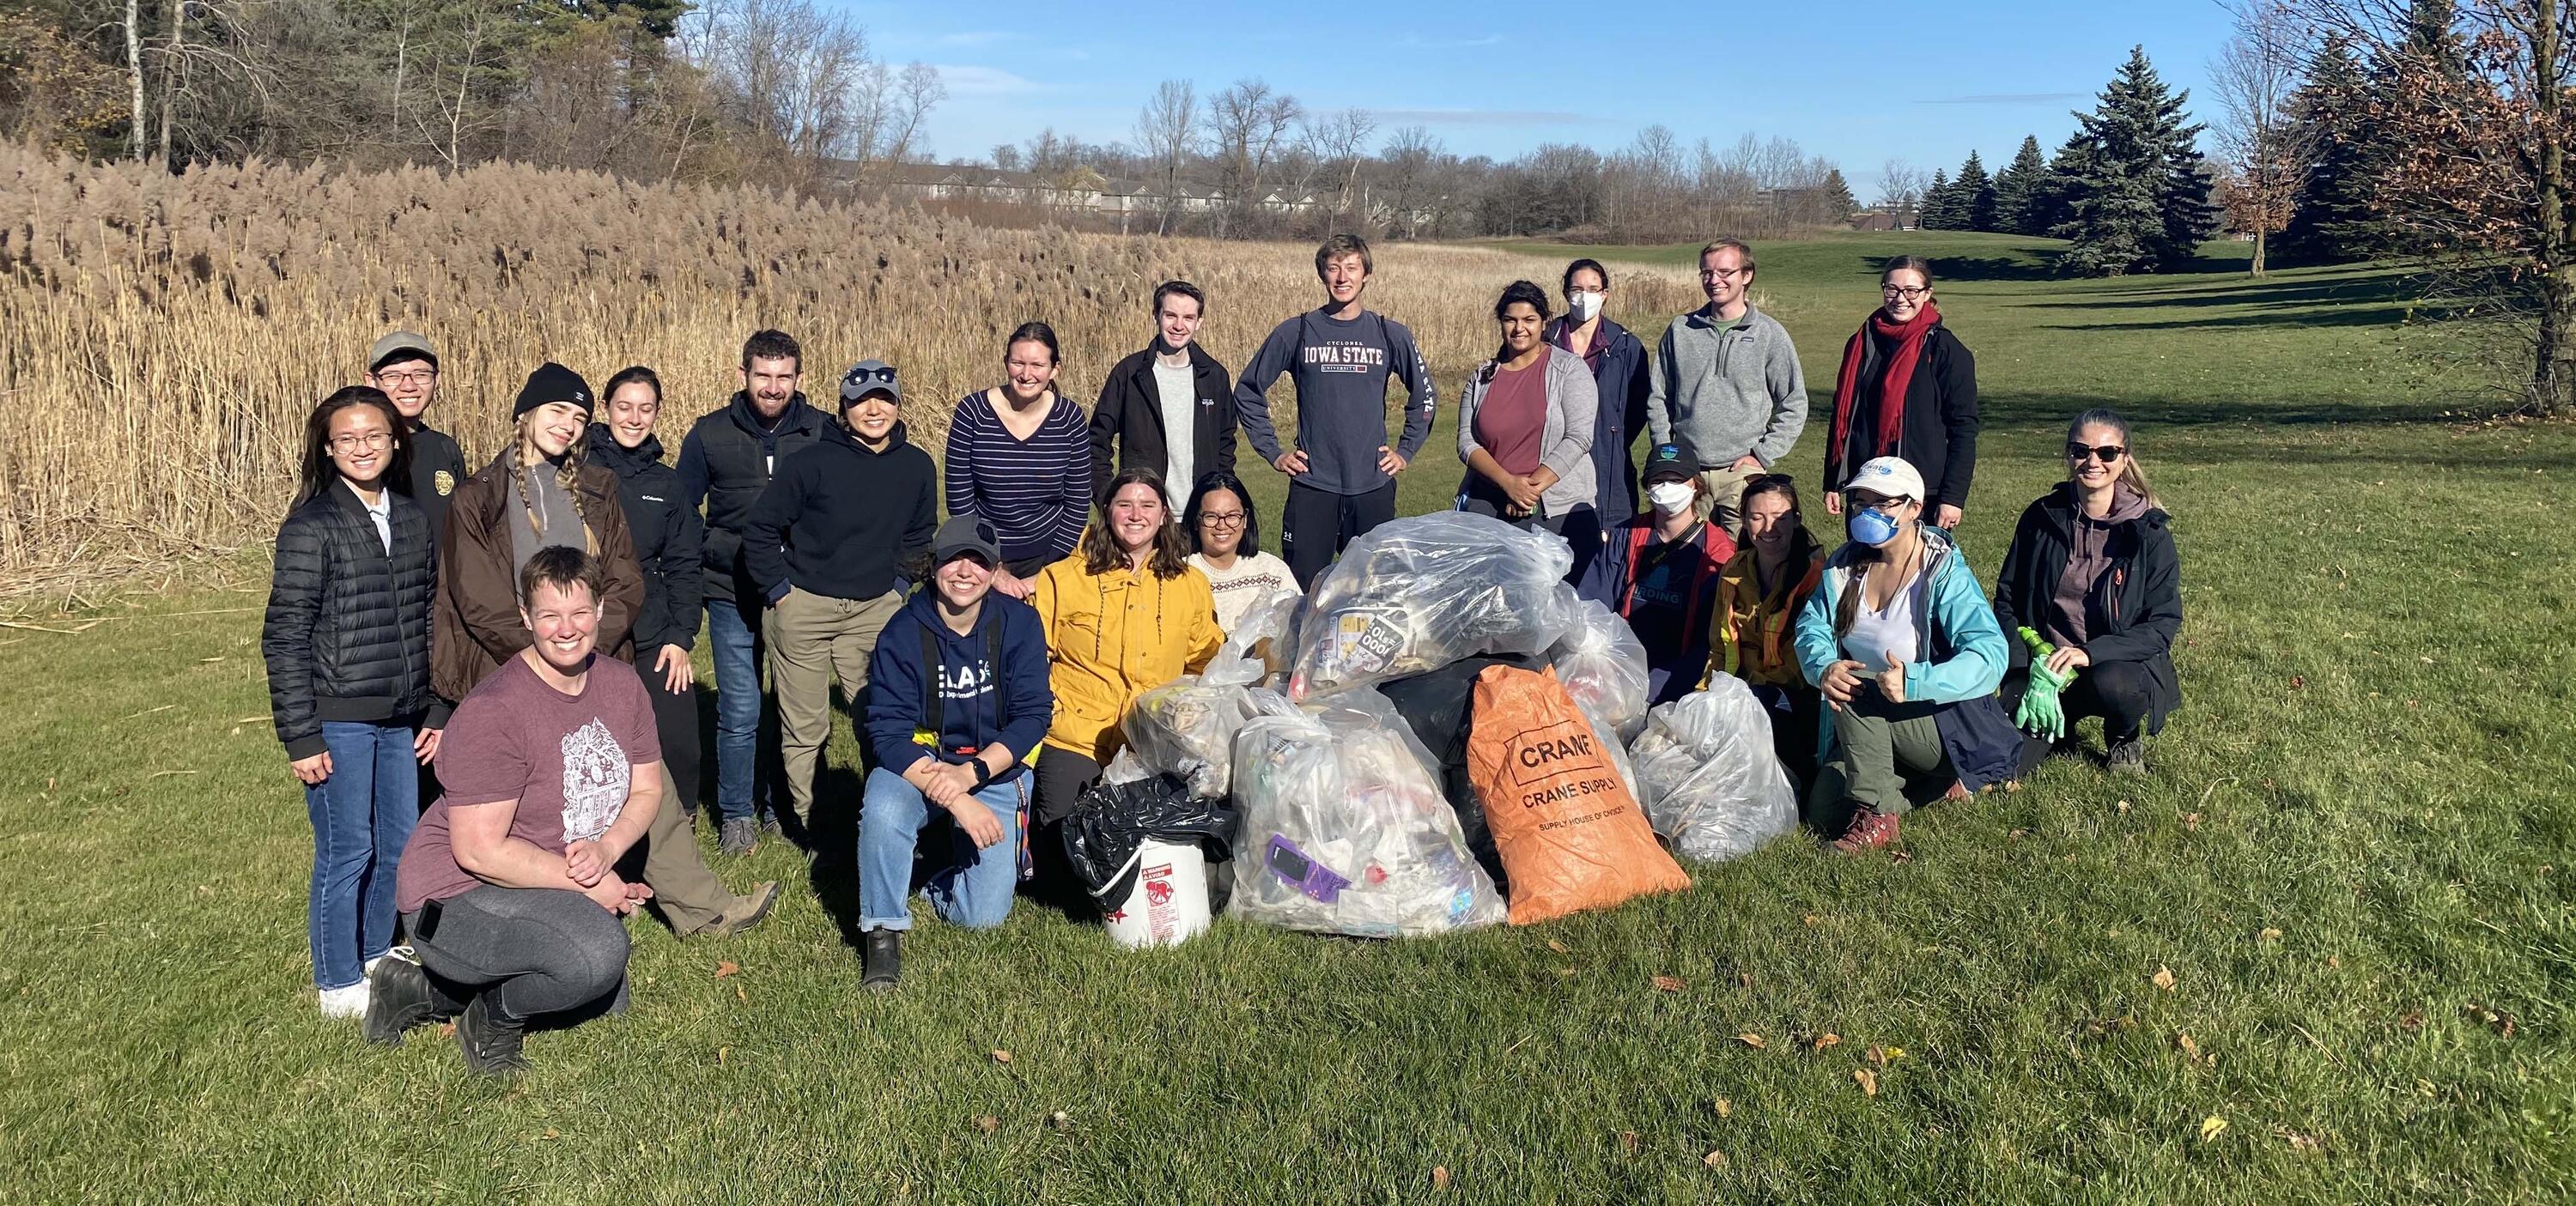 Group photo of participants with pile of bagged garbage.